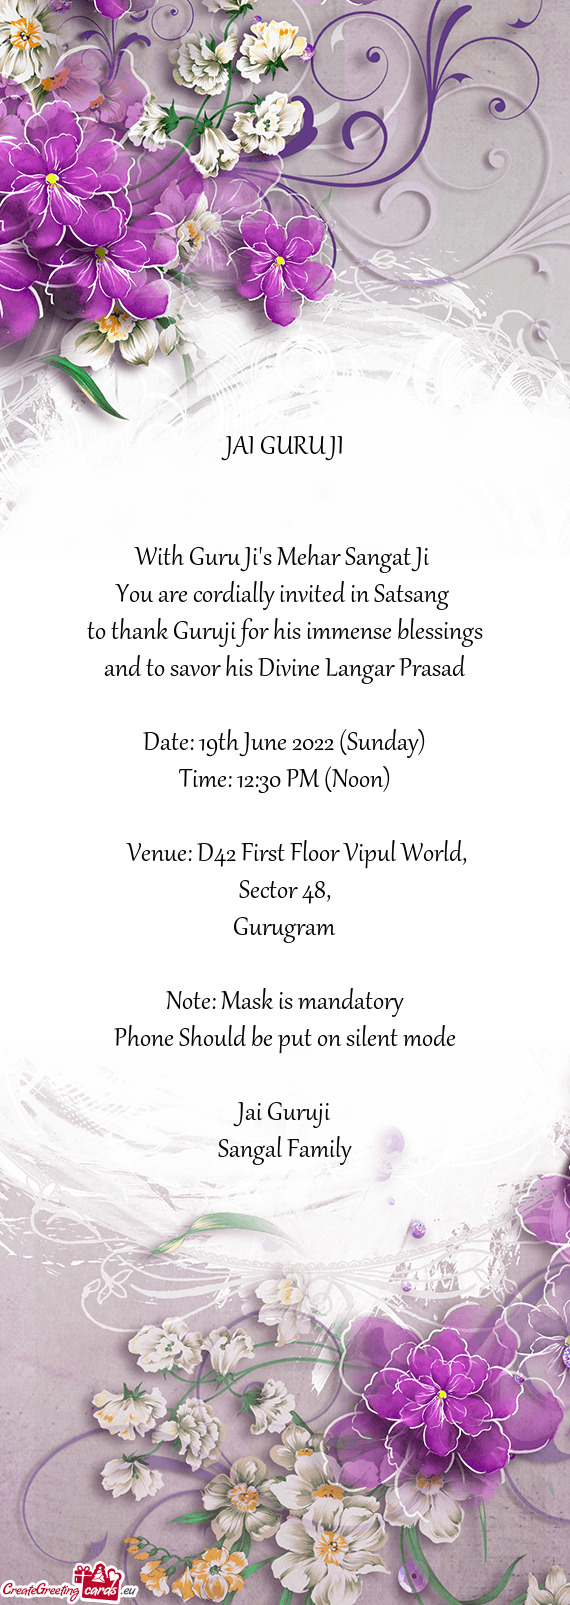 You are cordially invited in Satsang